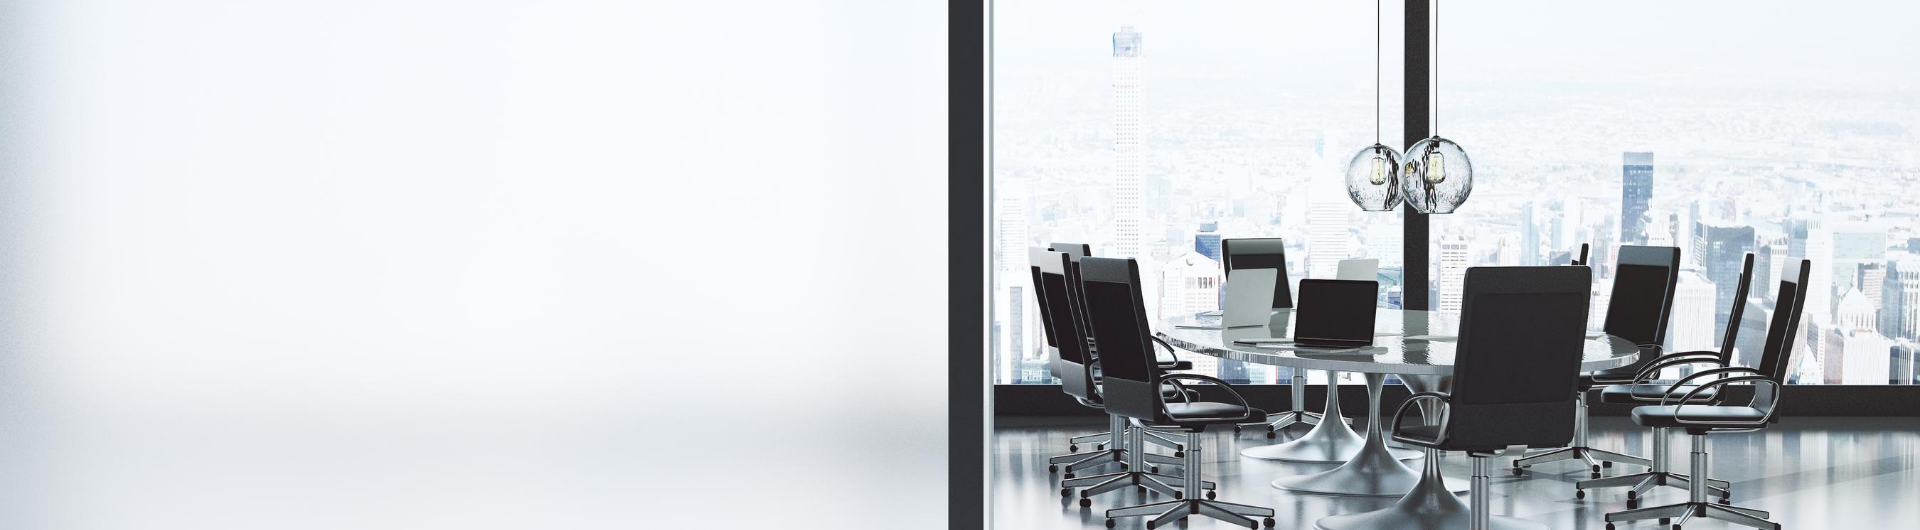 BenQ display solution for hybrid and remote working in the modern workplace 